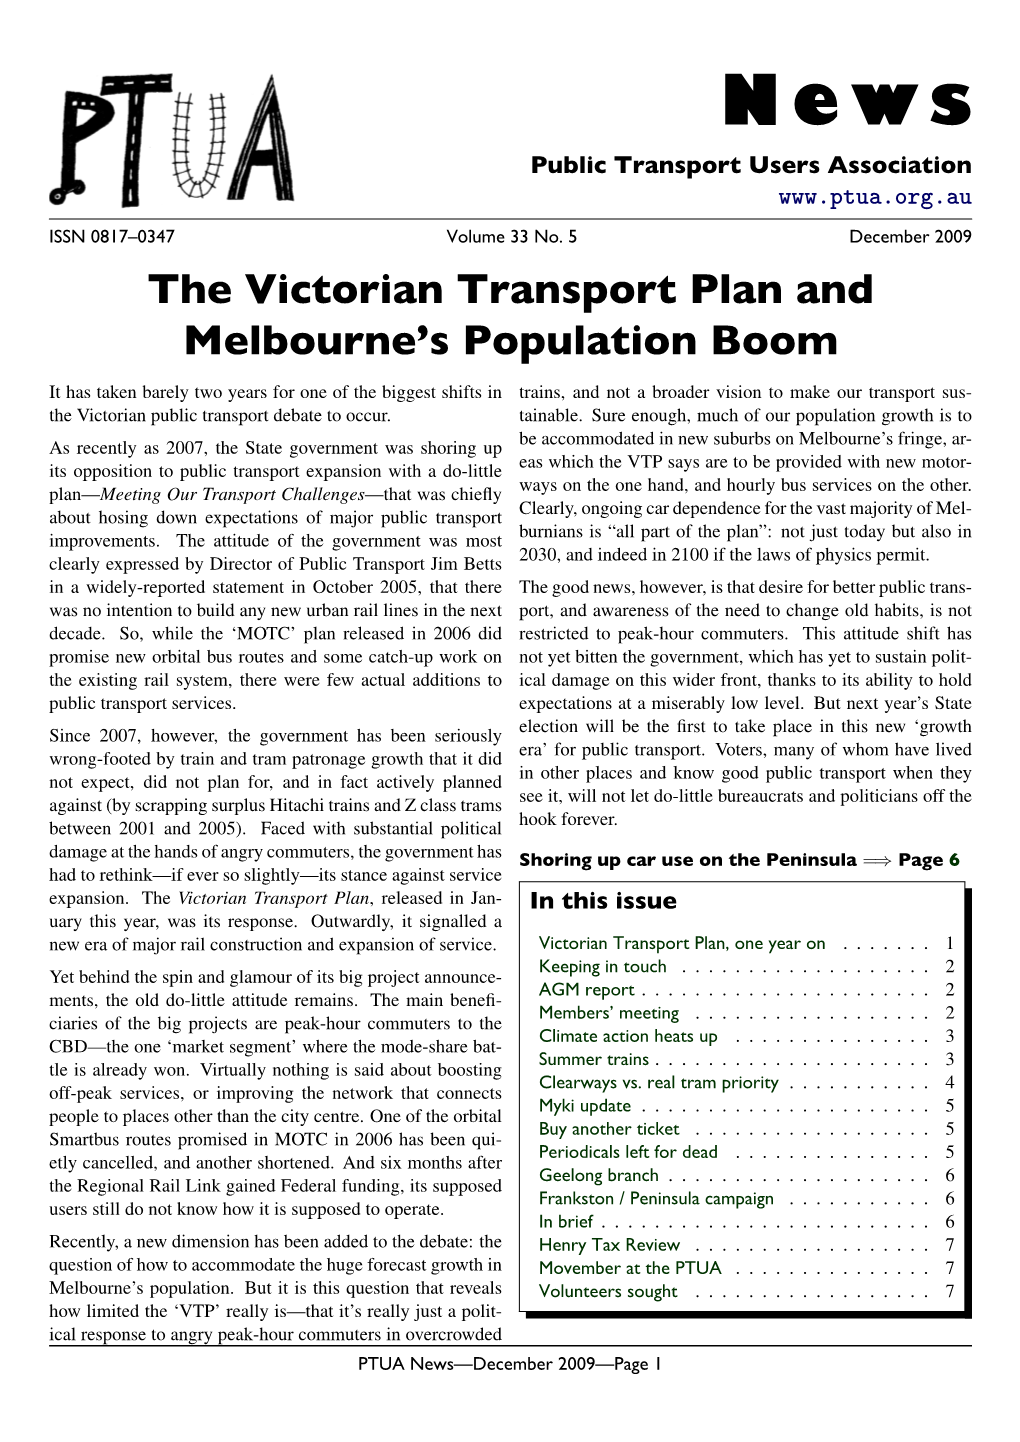 The Victorian Transport Plan and Melbourne's Population Boom